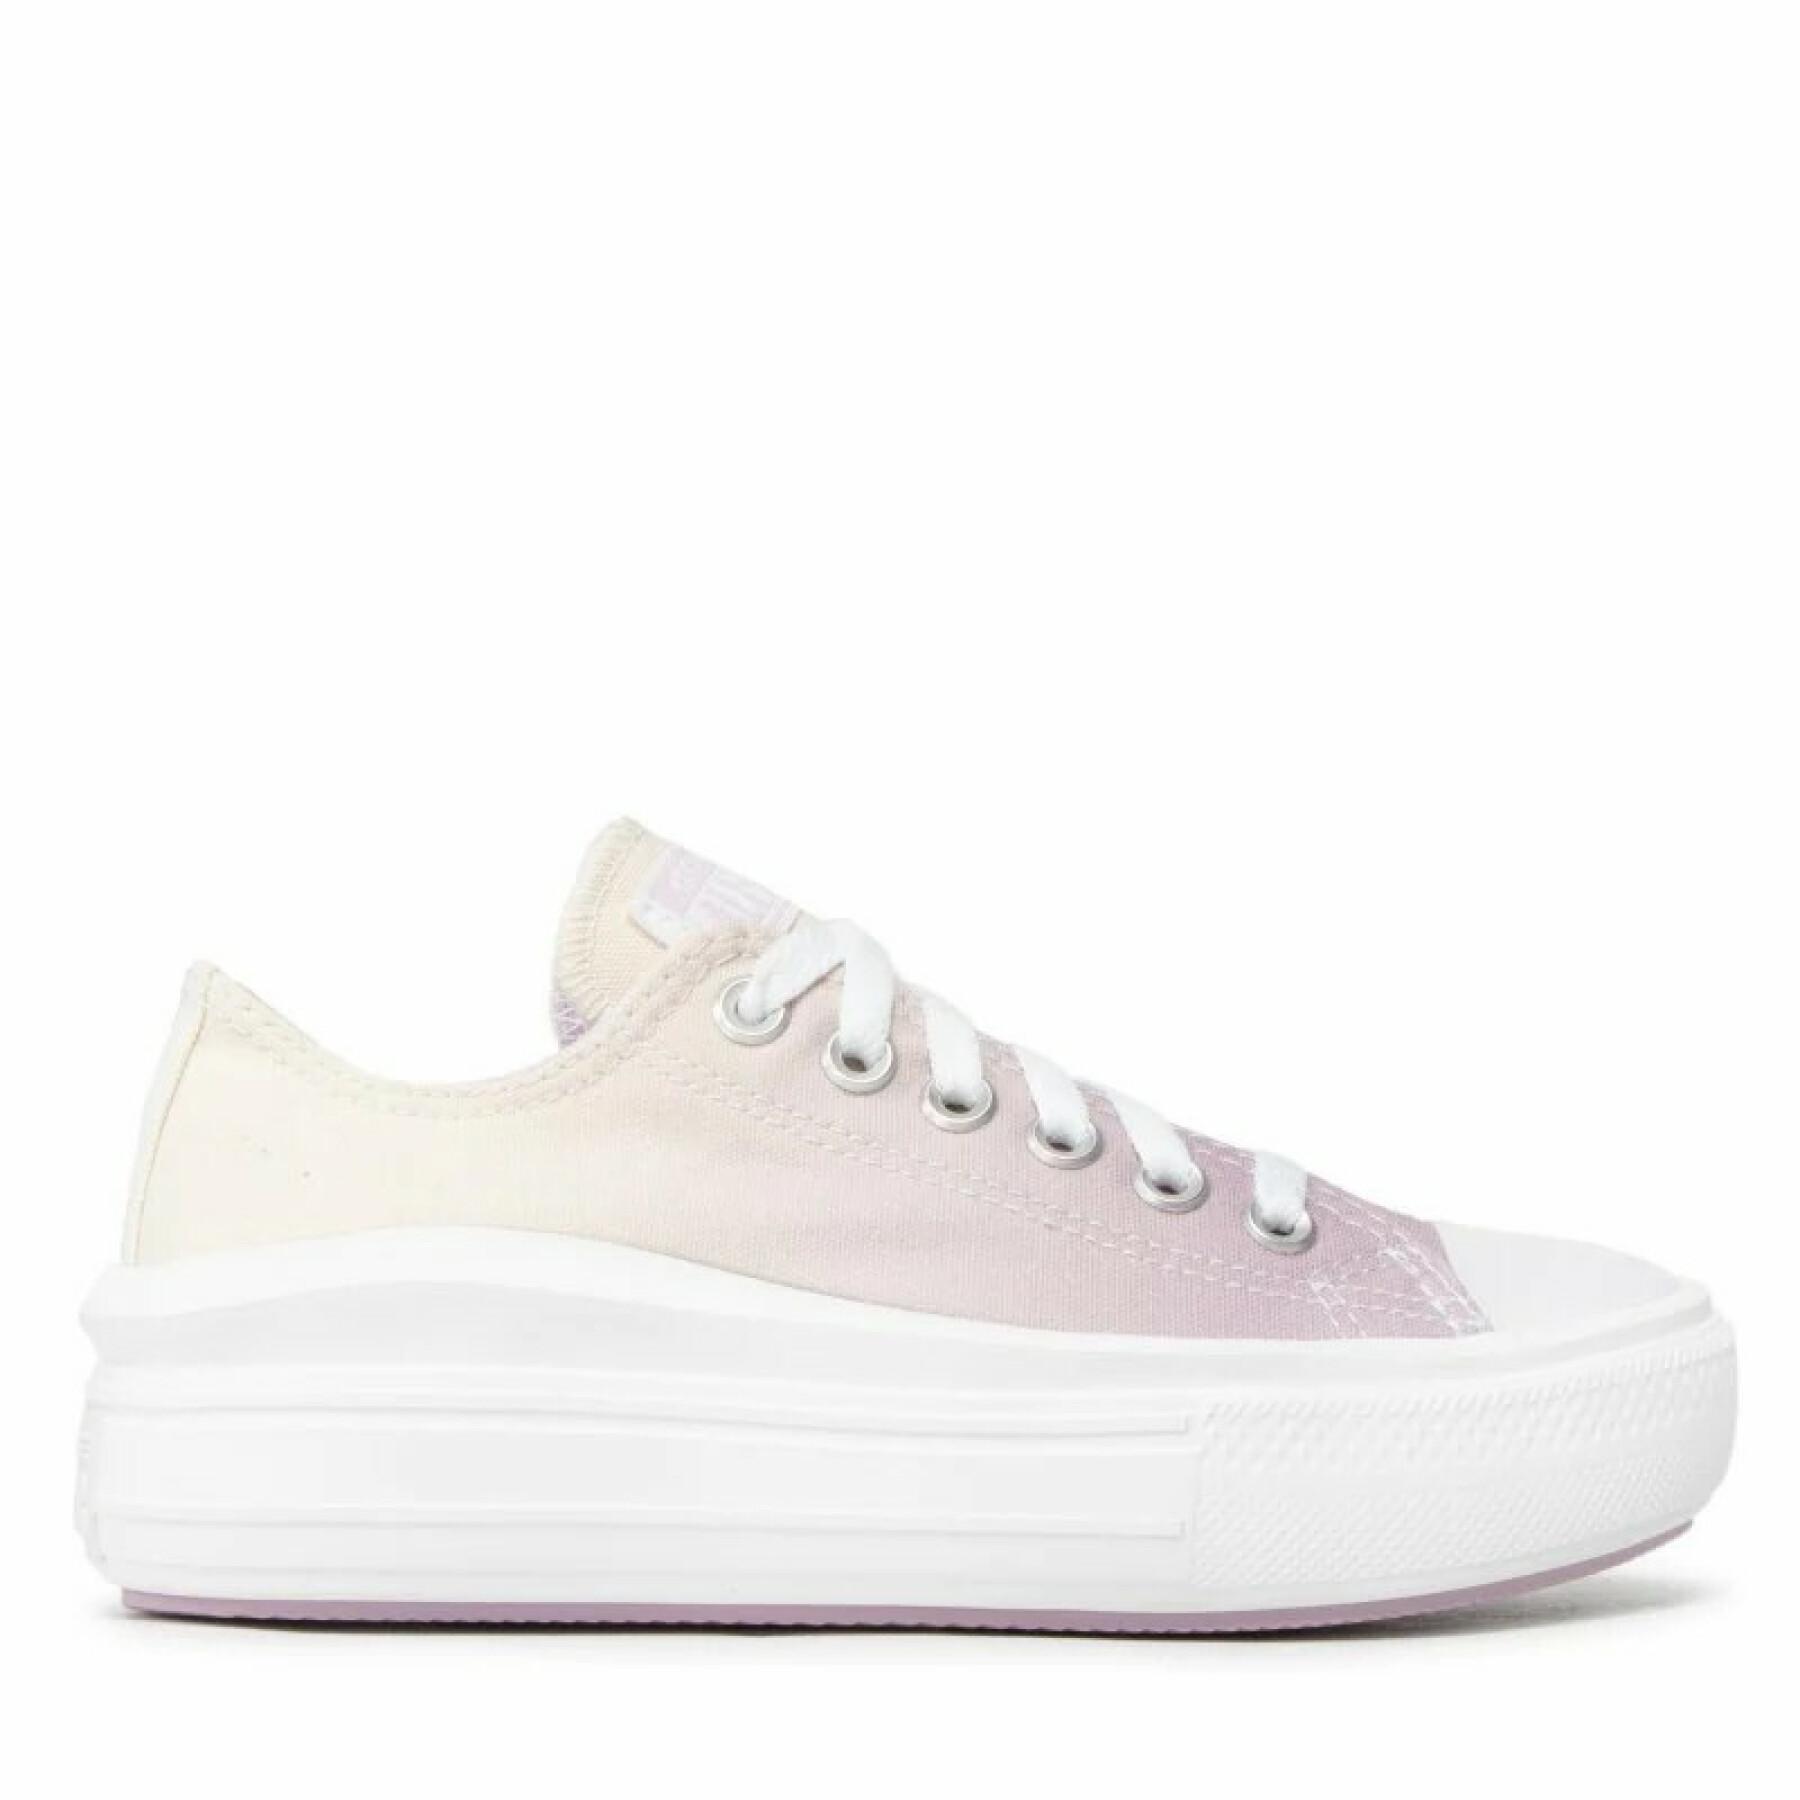 Women's sneakers Converse Chuck Taylor All Star Move Ox